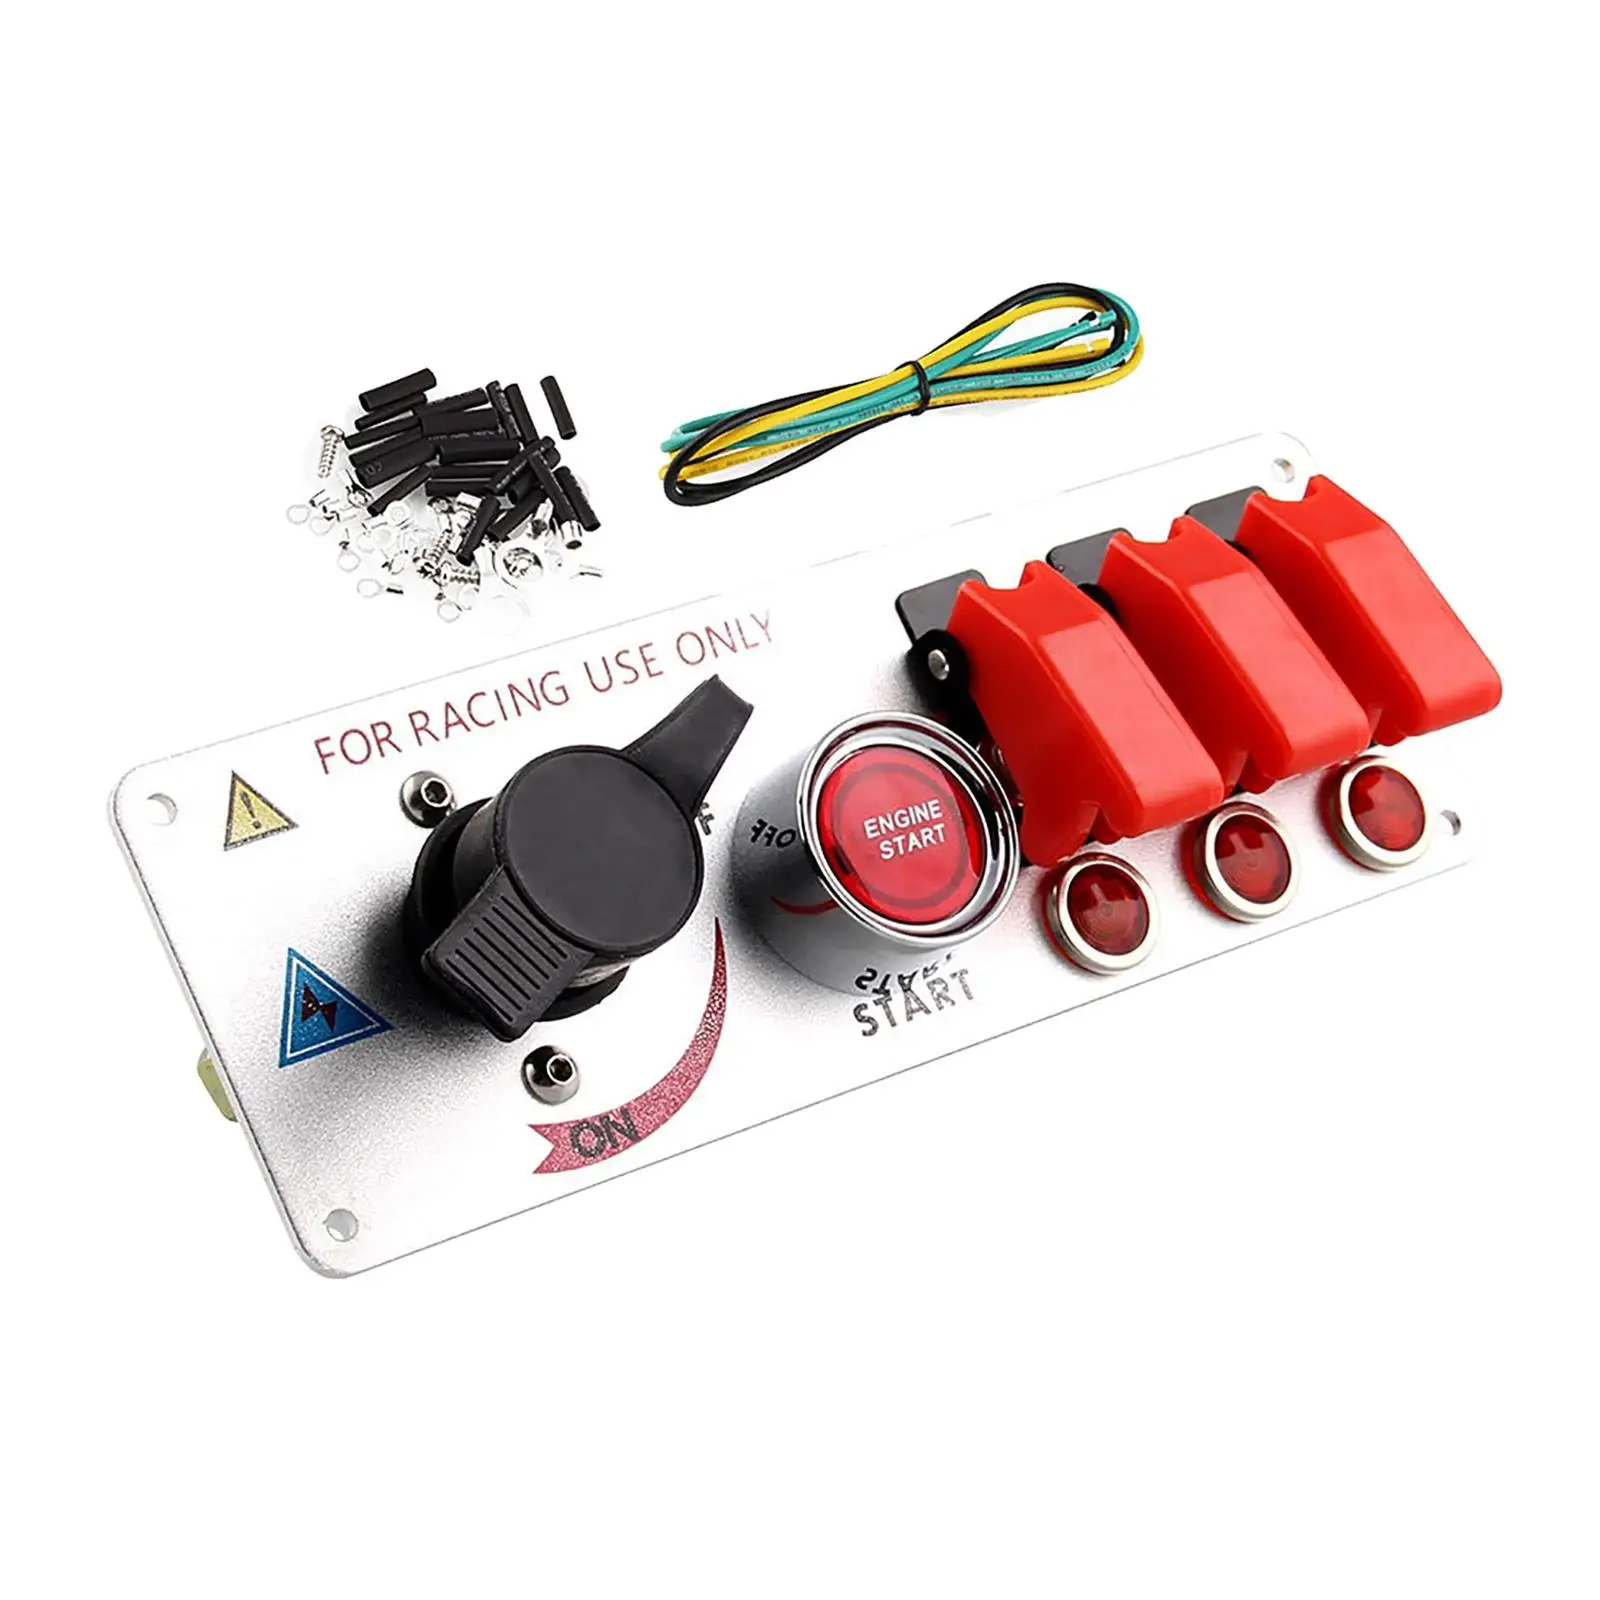 

Ignition Switch Panel 12V Direct Replaces High Performance Auto with Starter Switches Durable On/Off Premium Fits for Racing Car